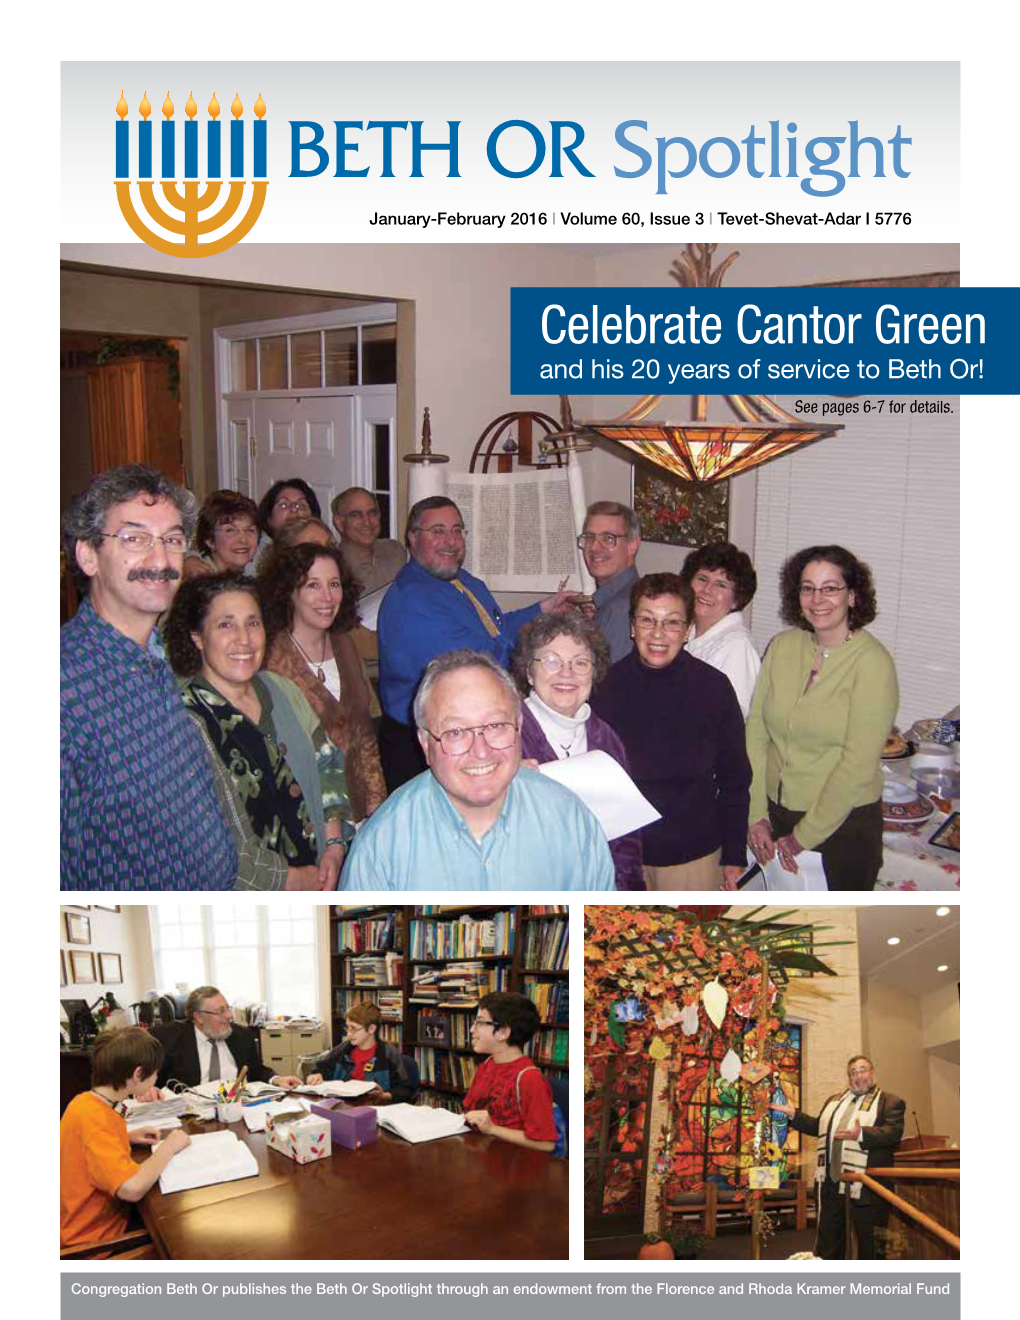 Celebrate Cantor Green and His 20 Years of Service to Beth Or! See Pages 6-7 for Details